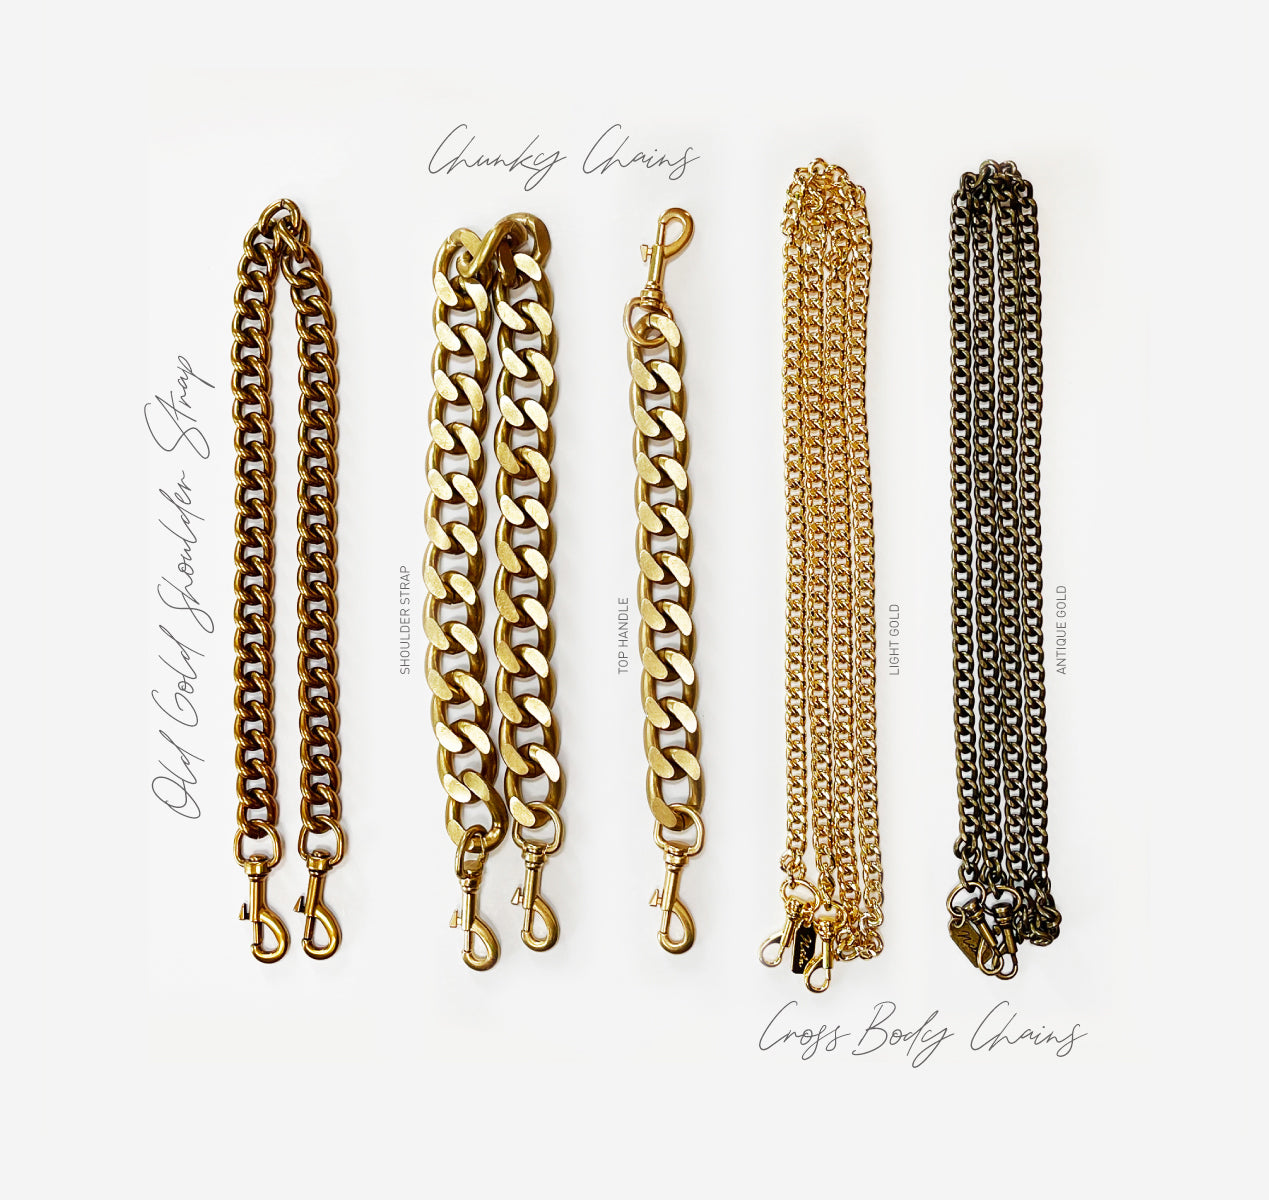 New Golden Balls Chain Replacement Shoulder Strap Non-fading Chain